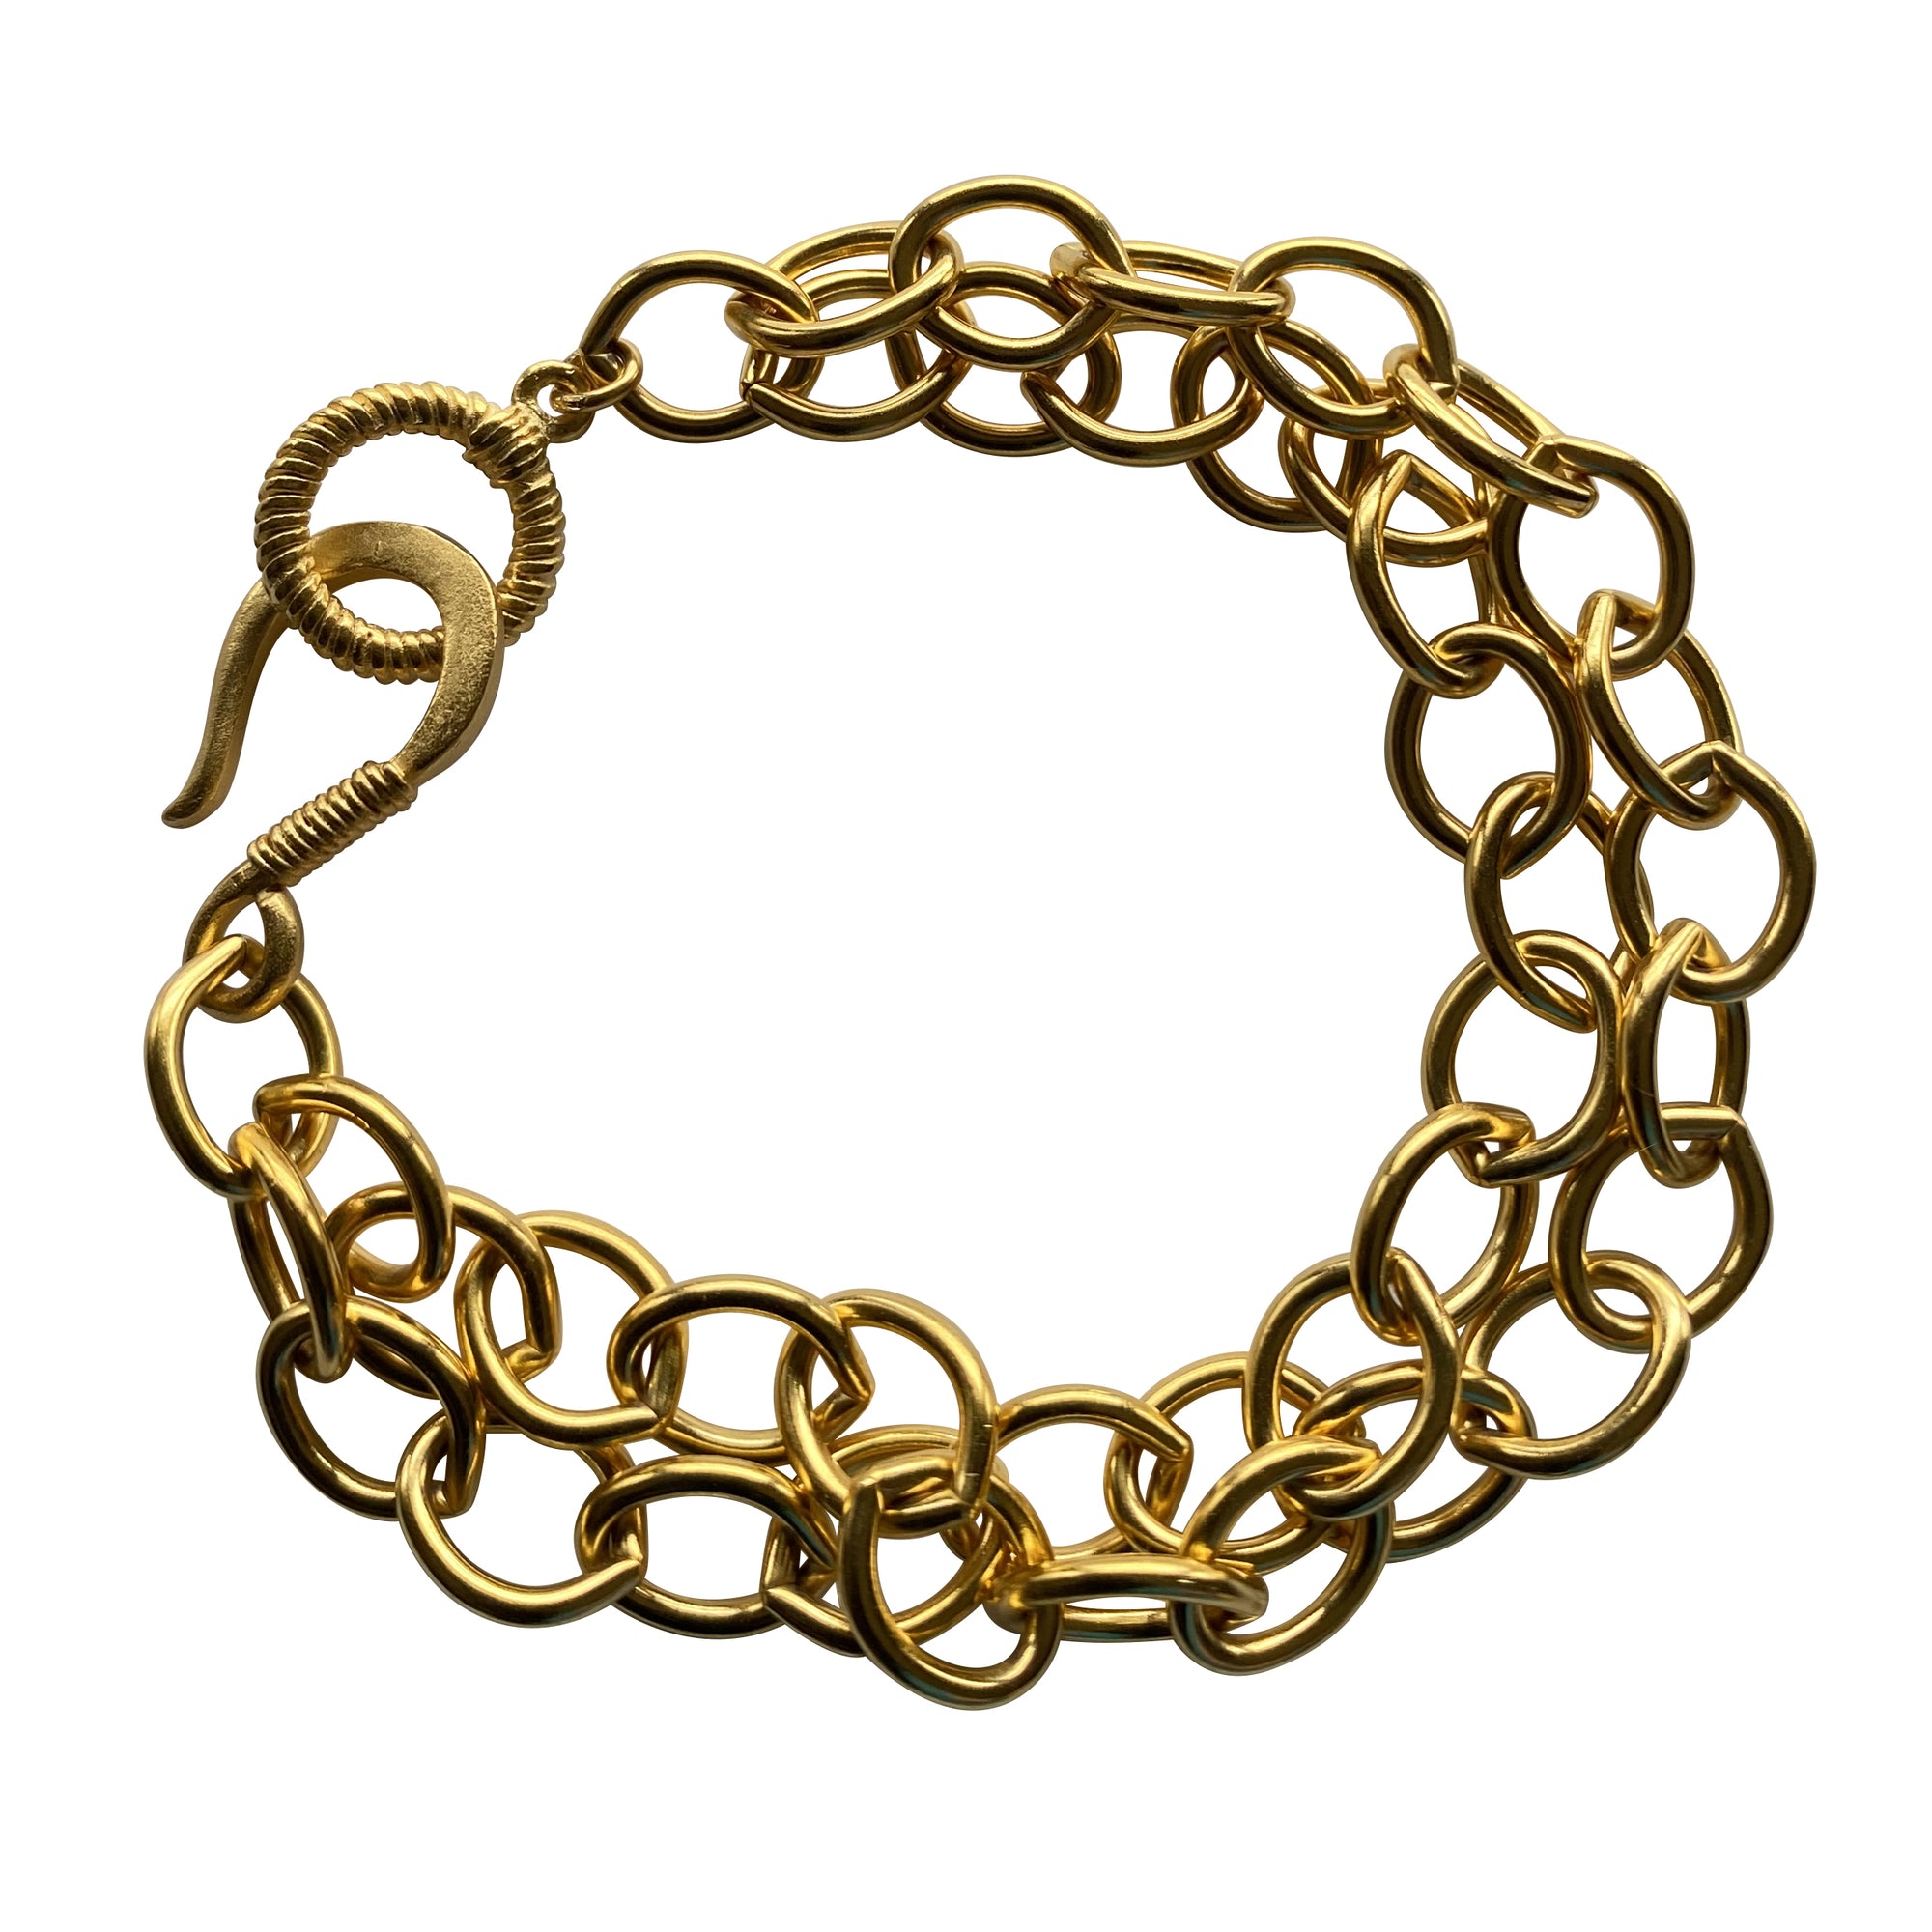 Chunky Gold Chain Bracelet with Toggle Clasp